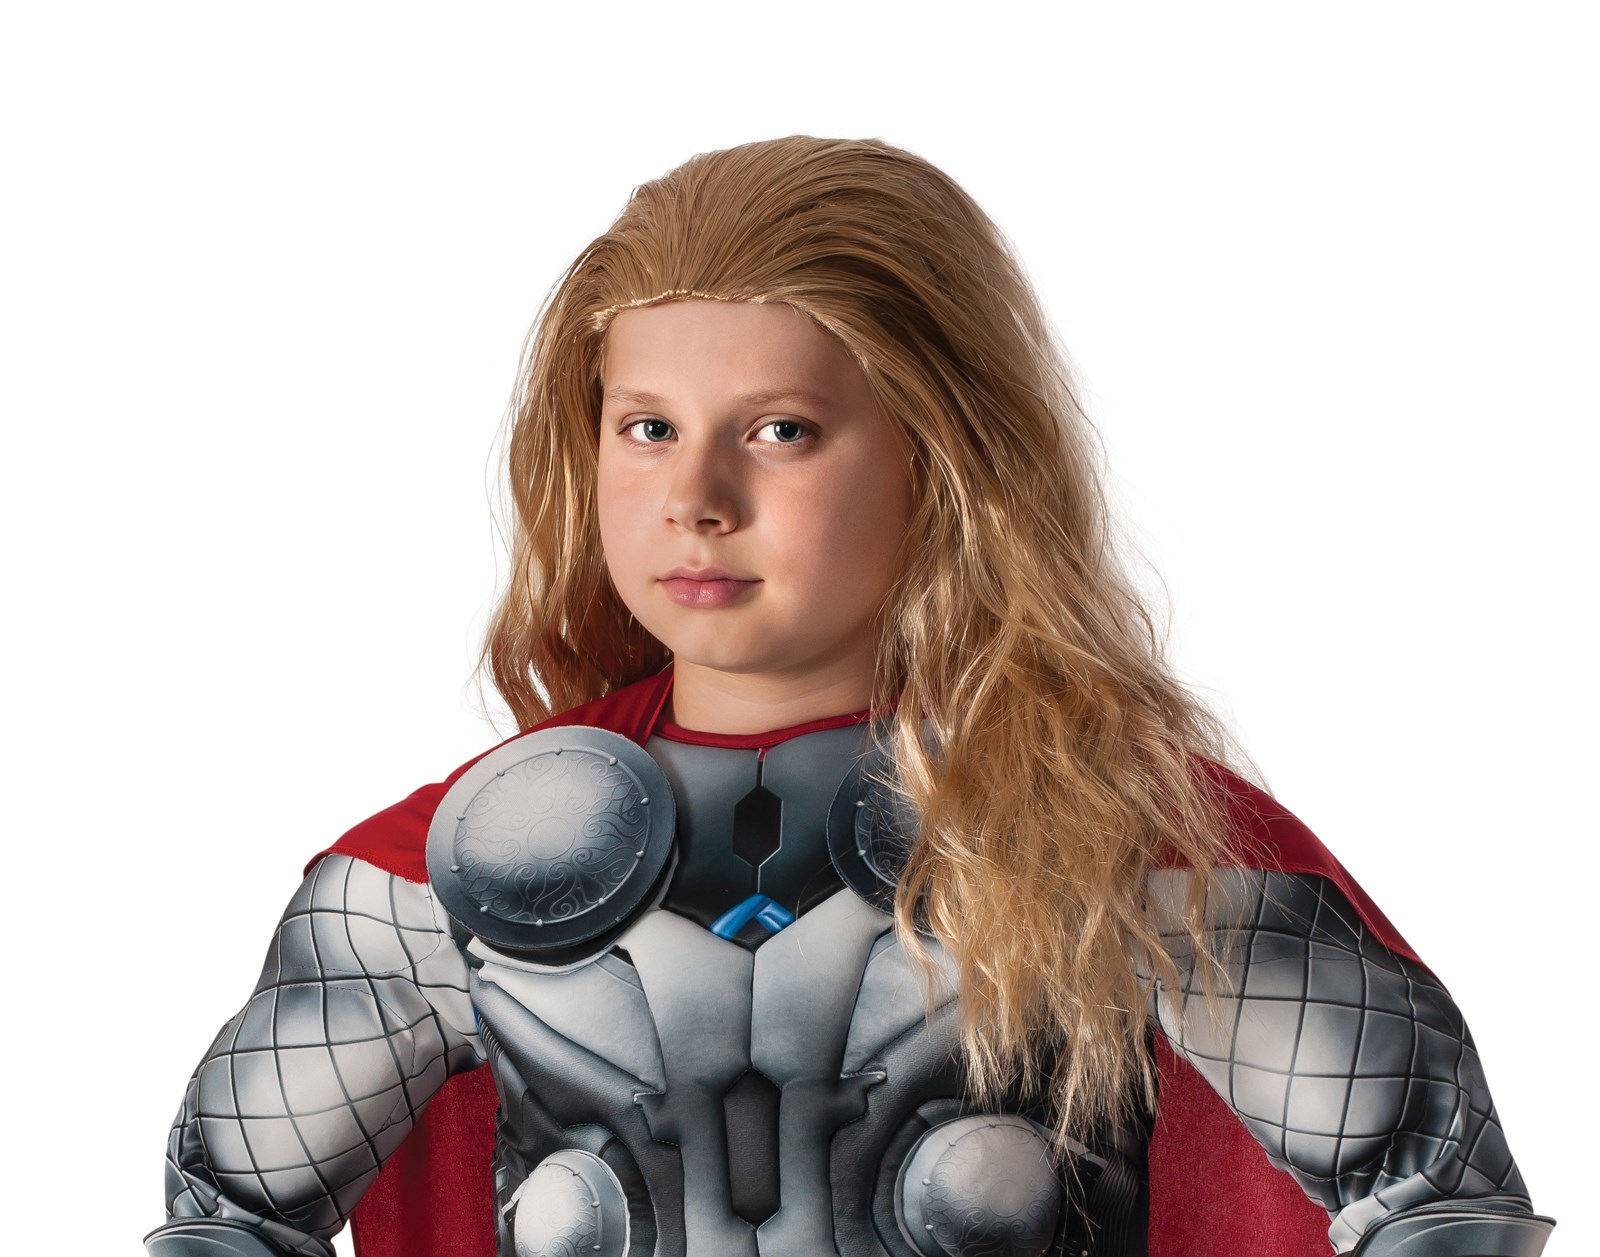 Avengers 2 - Age of Ultron: Thor Wig For Kids